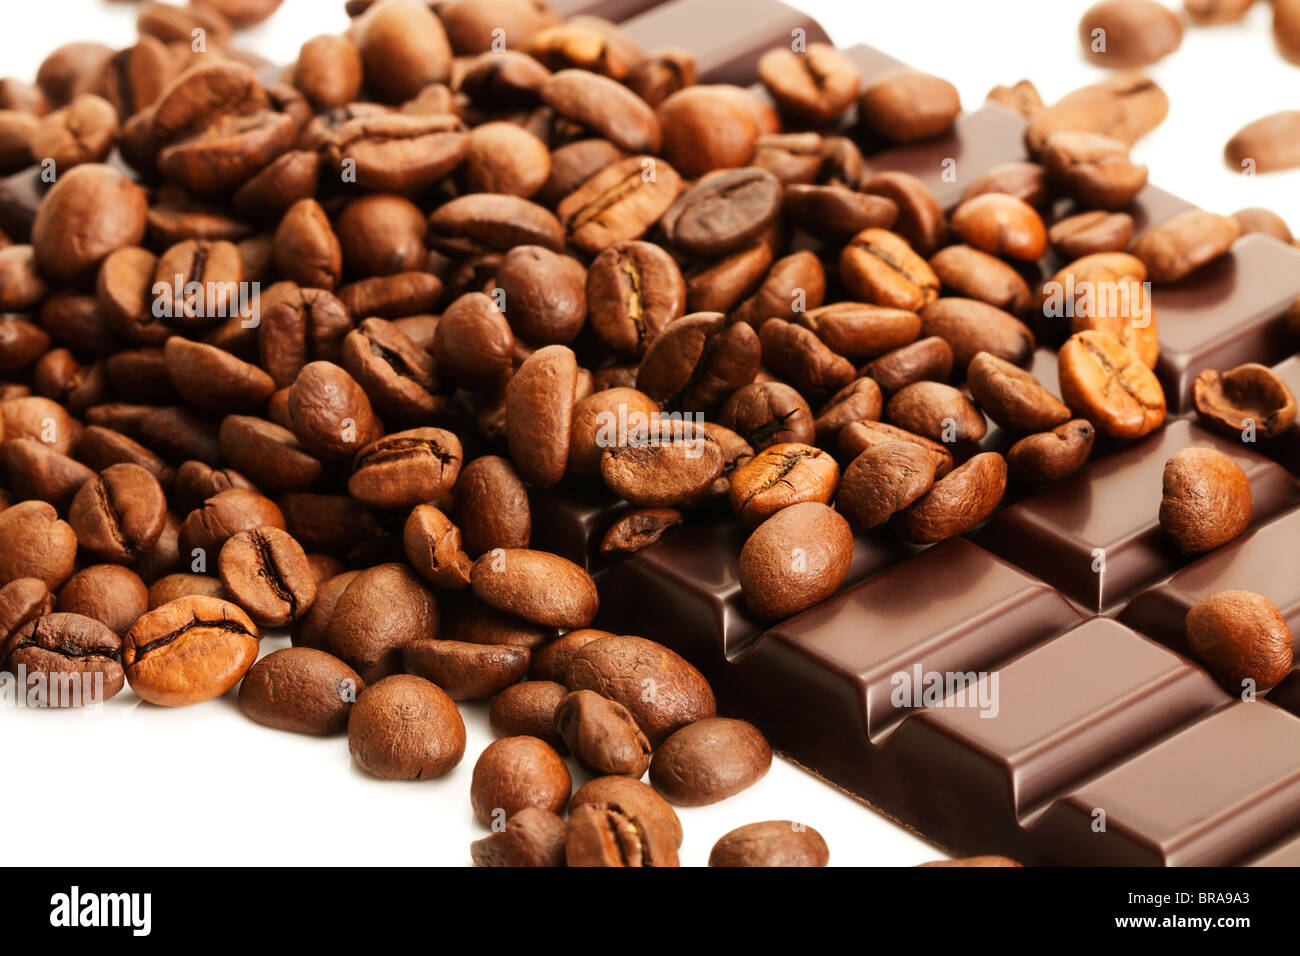 a lot of coffee beans on a plain chocolate bar Stock Photo